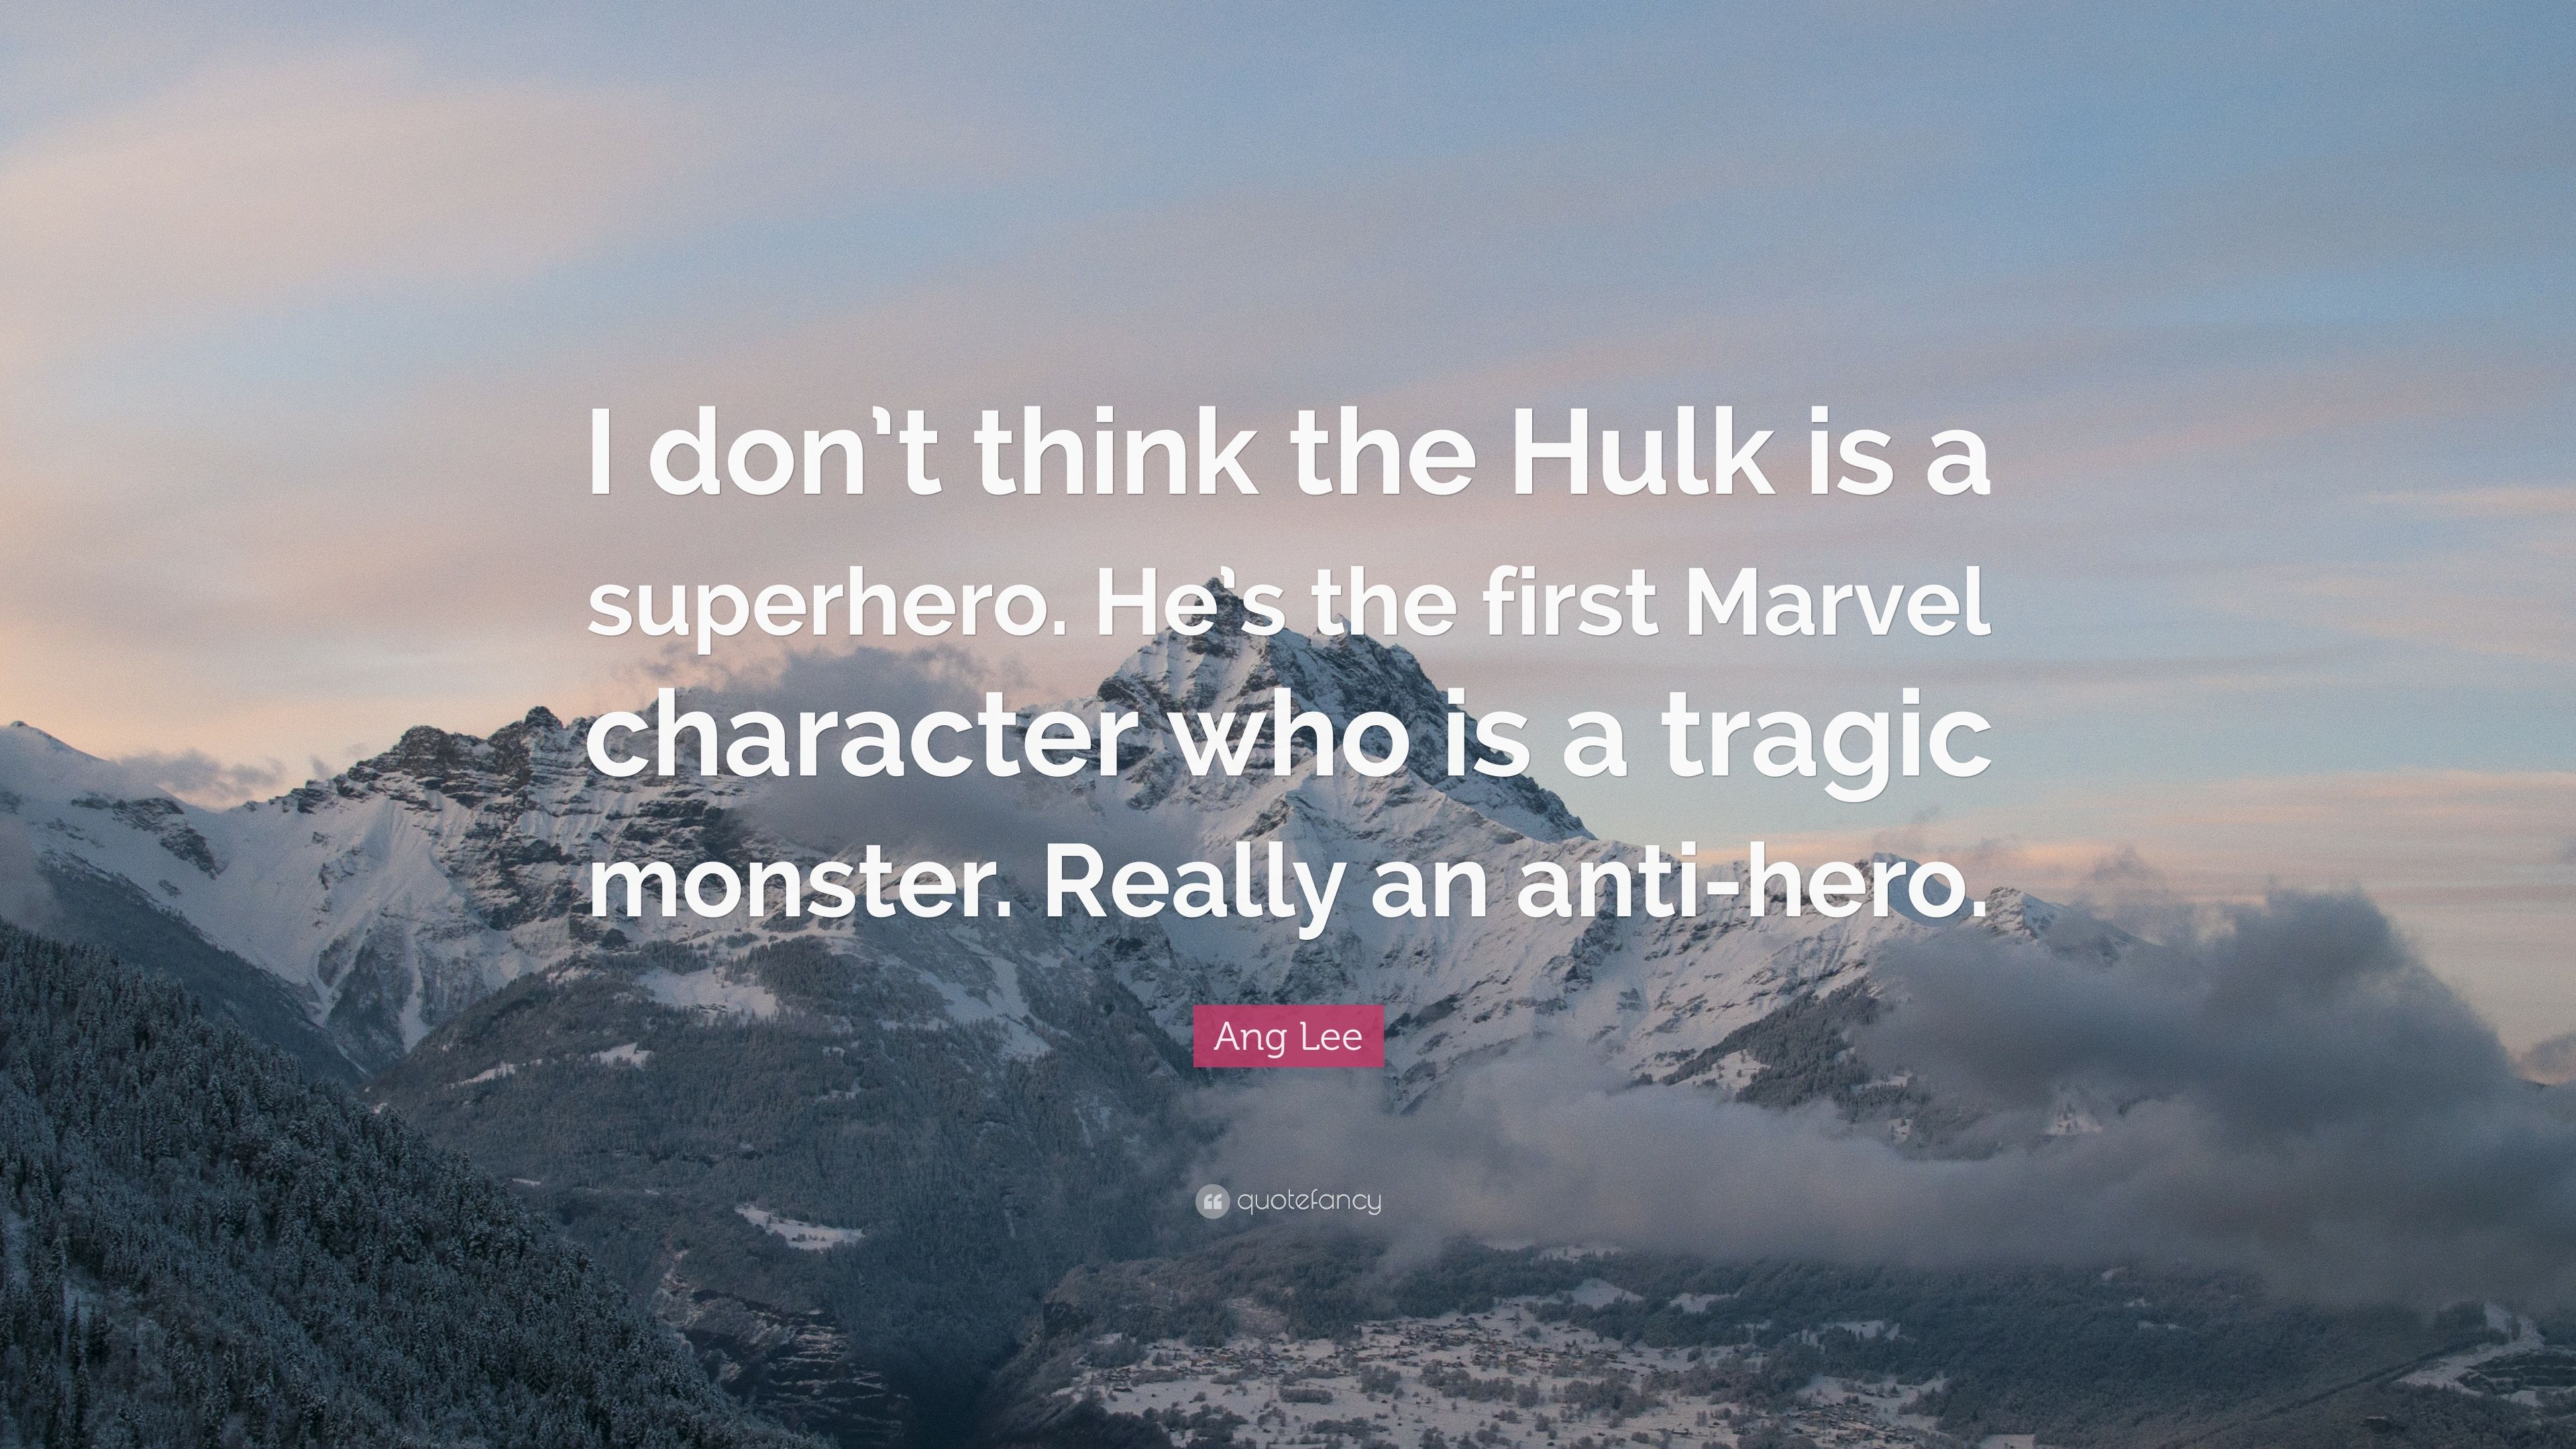 Ang Lee Quote: “I don't think the Hulk is a superhero. He's